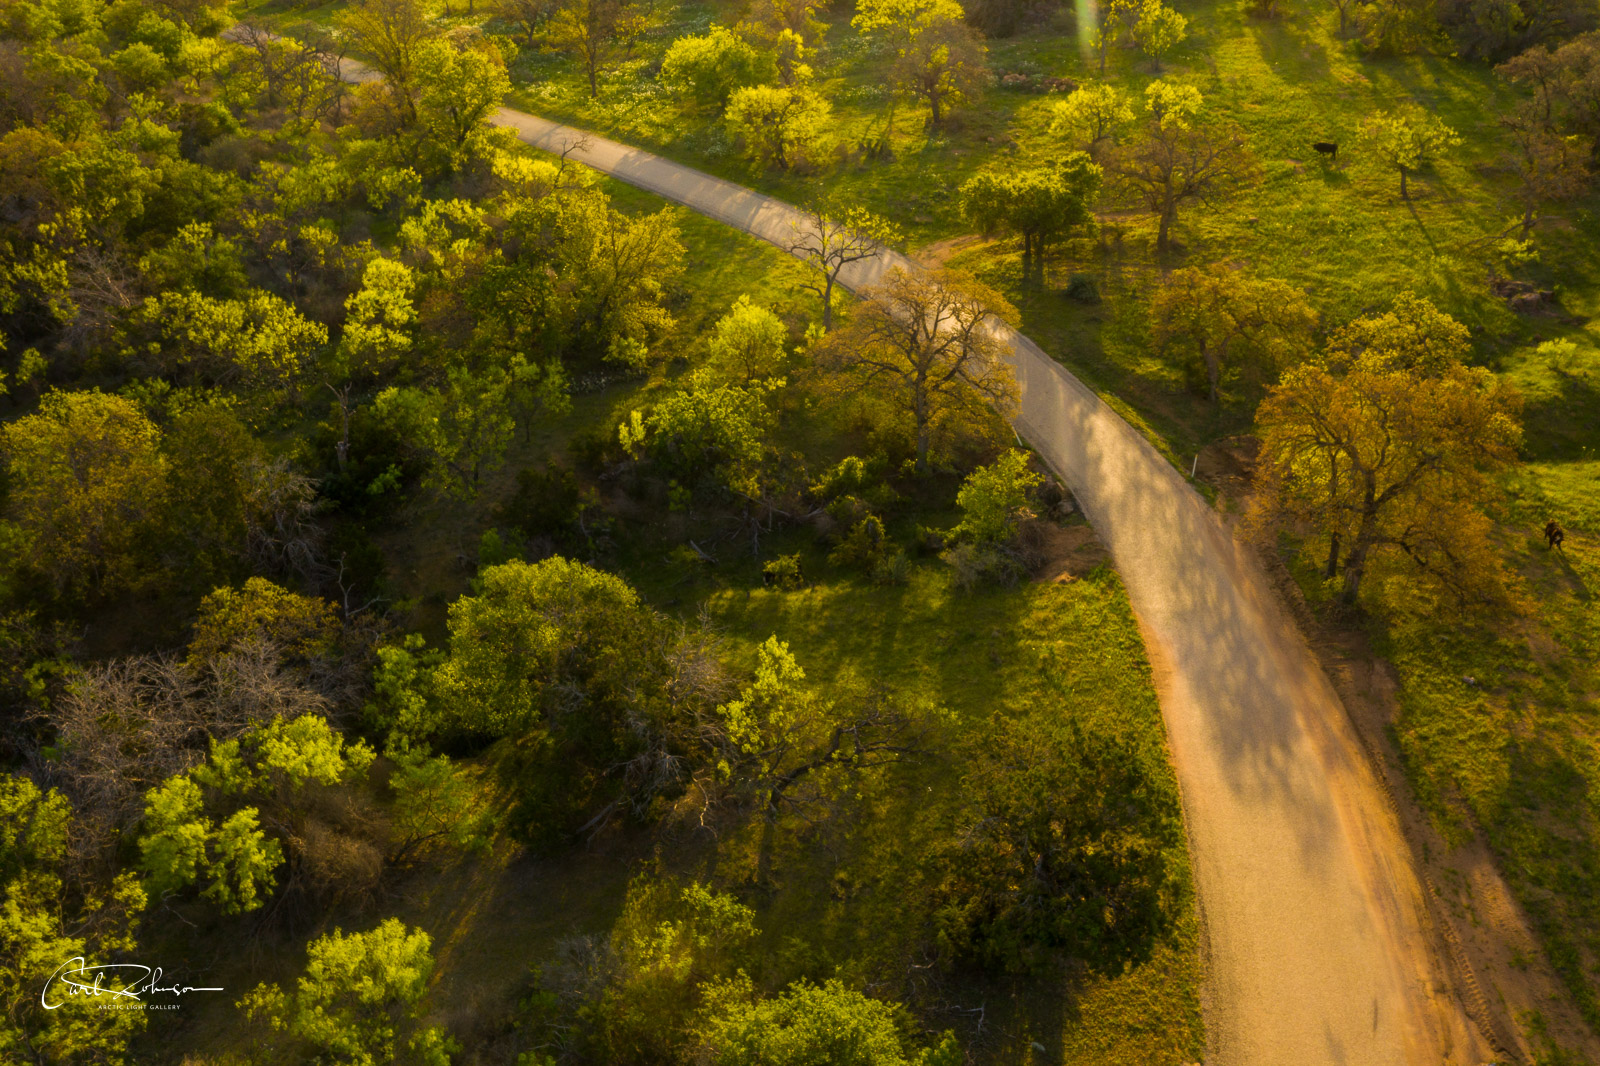 Morning light washes across trees alongside the Willow City Loop road through ranch lands in the Texas Hill Country.